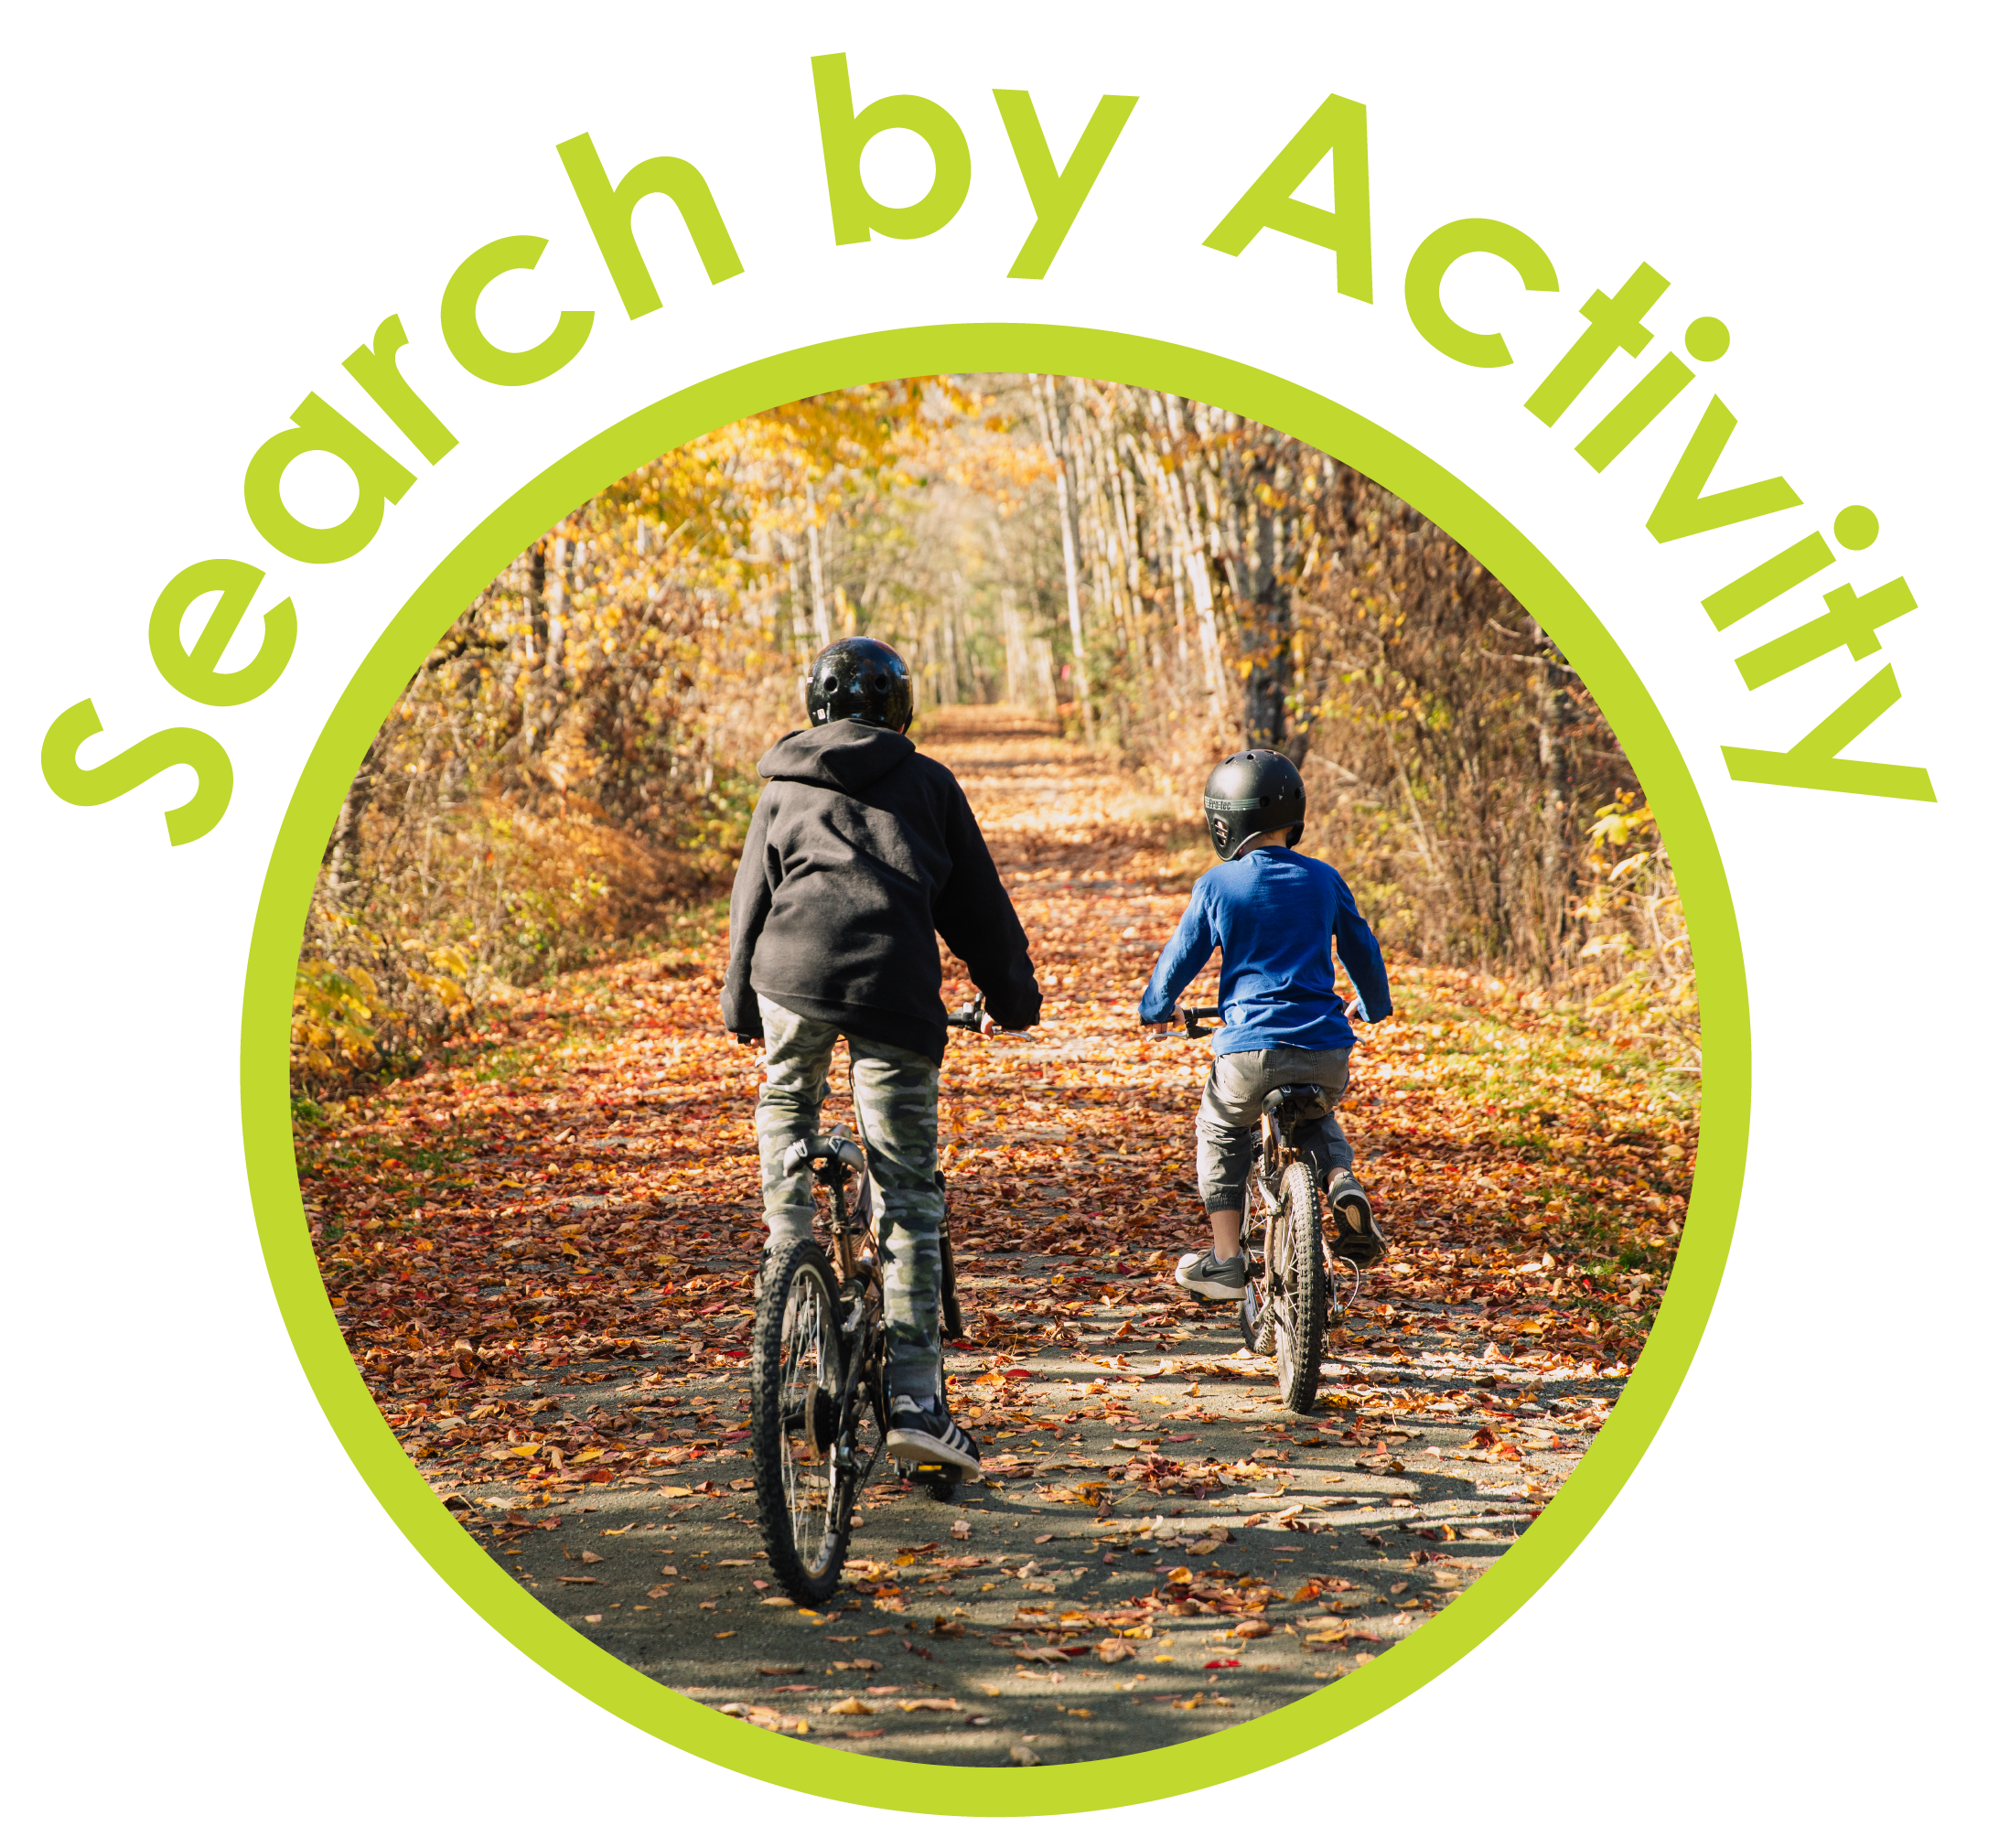 Clickable icon to search CVRD parks by activity Opens in new window